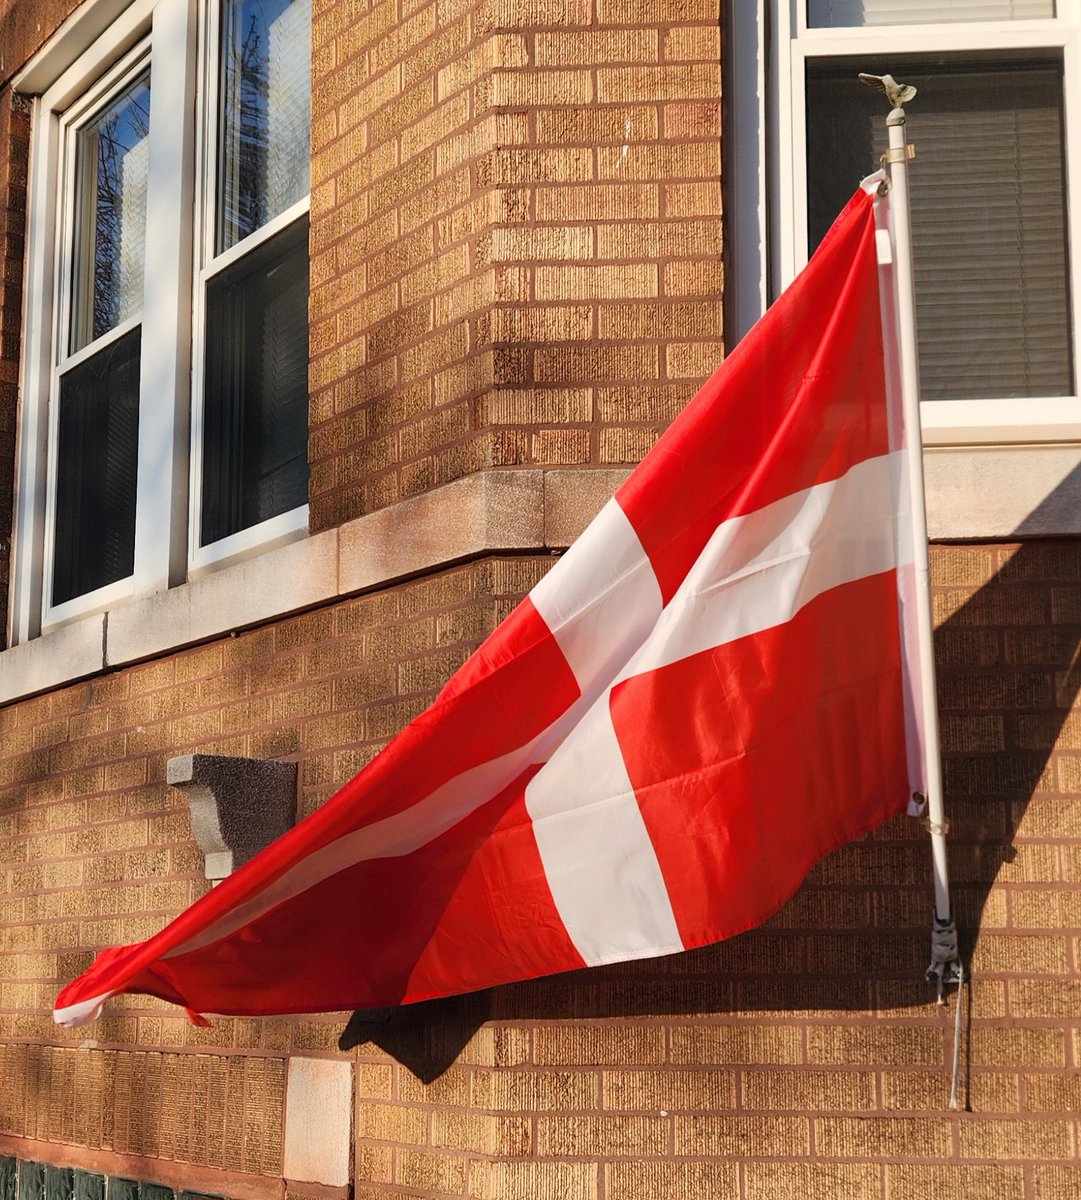 Today's front #flagoftheday Denmark 🇩🇰 (Danmark). It should be flying for Queen Margrethe II's birthday. But I forgot to update my spreadsheet after she abdicated in January, with her eldest son becoming King Frederik X.